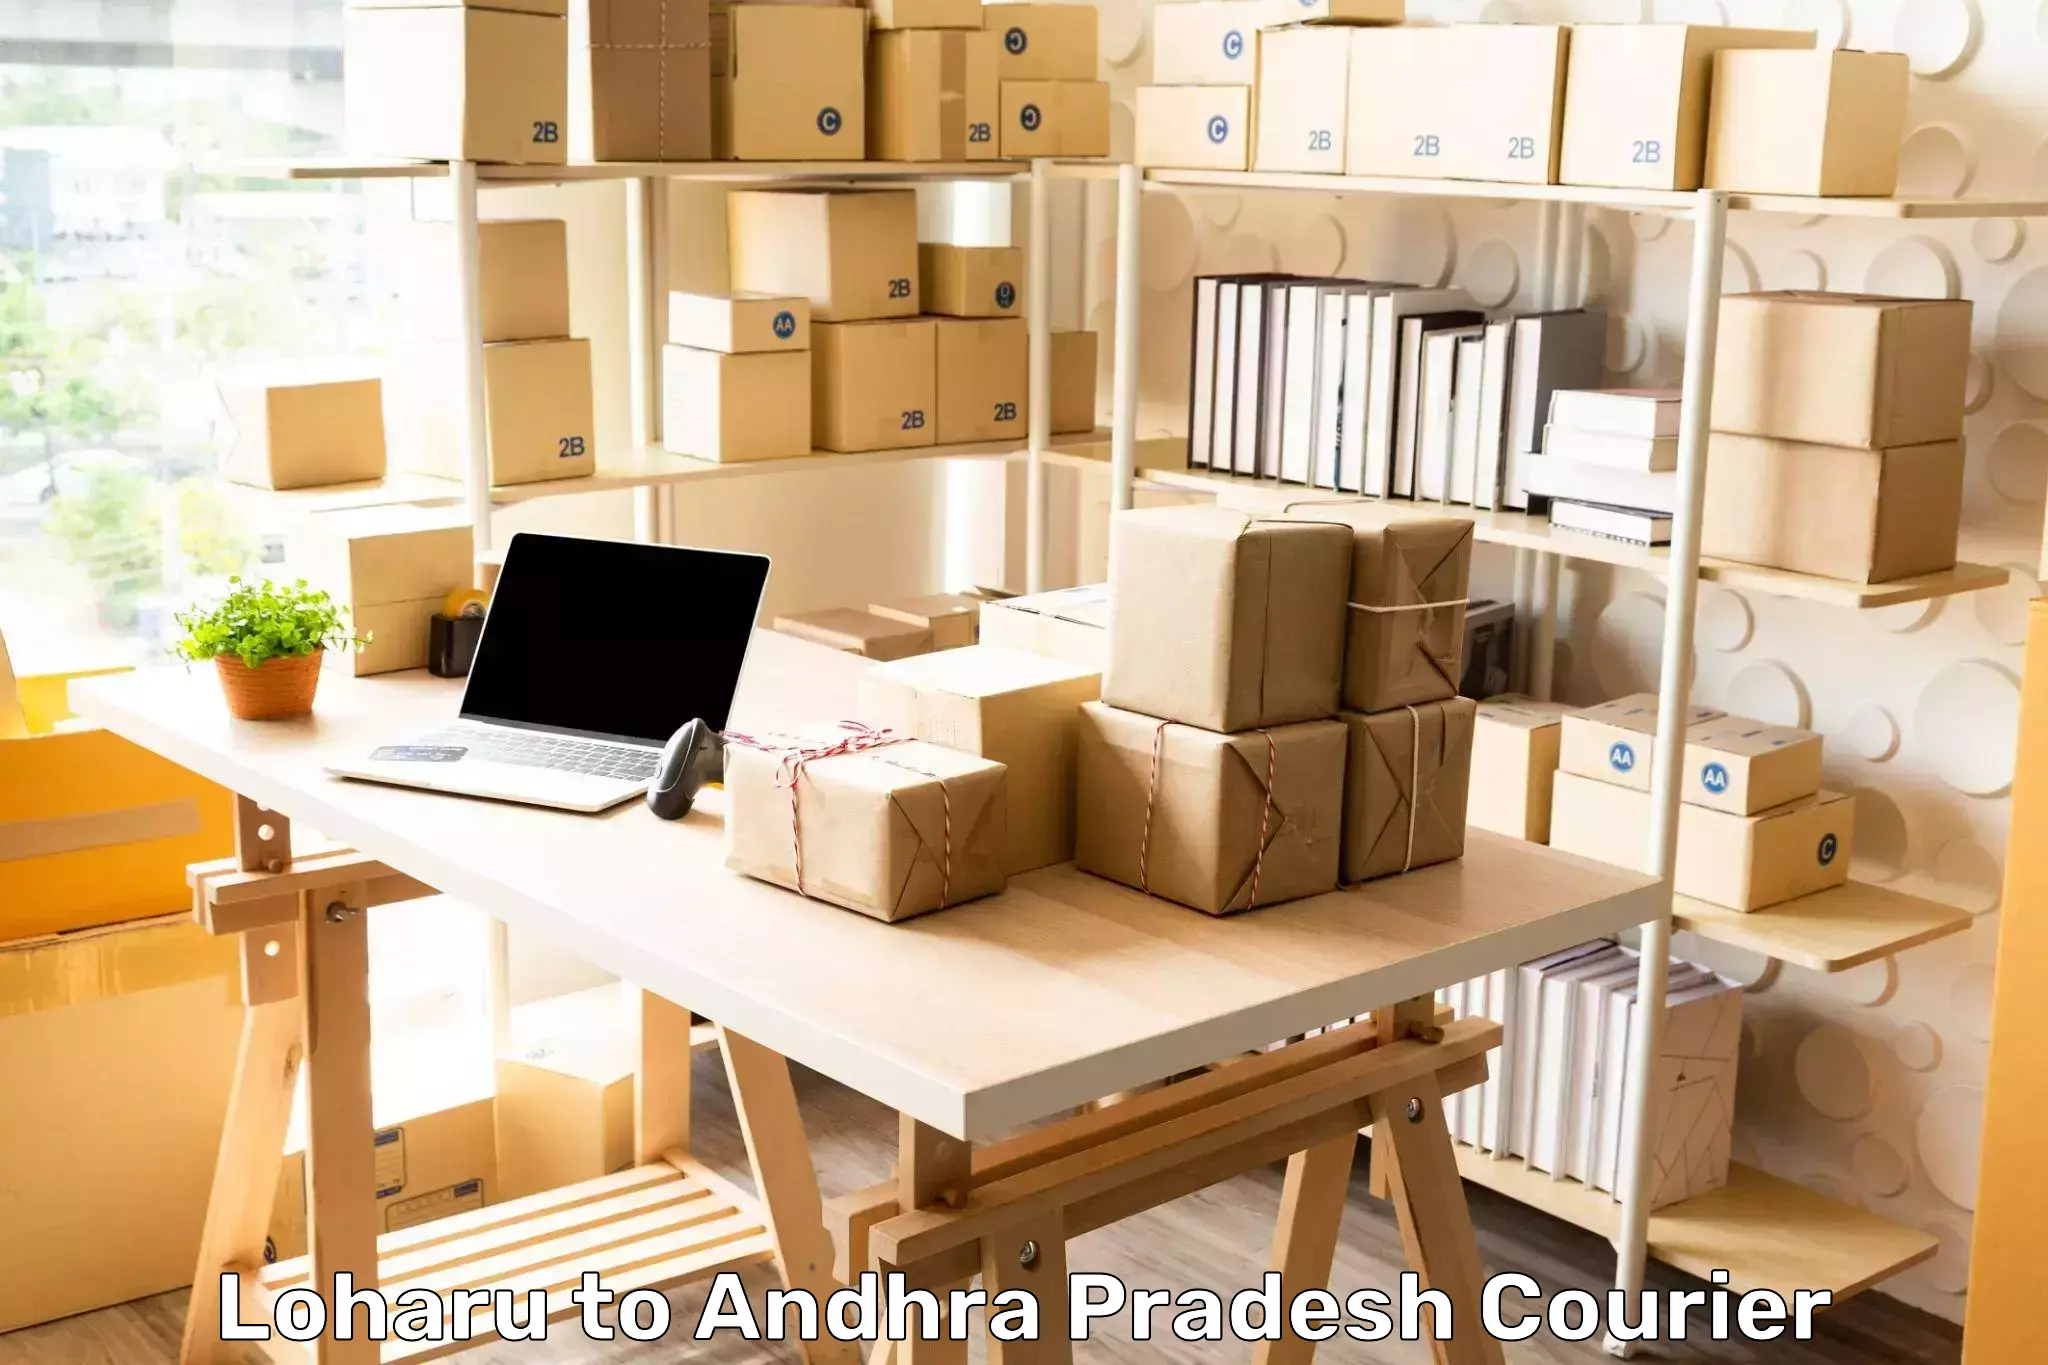 Express courier facilities Loharu to Srisailam